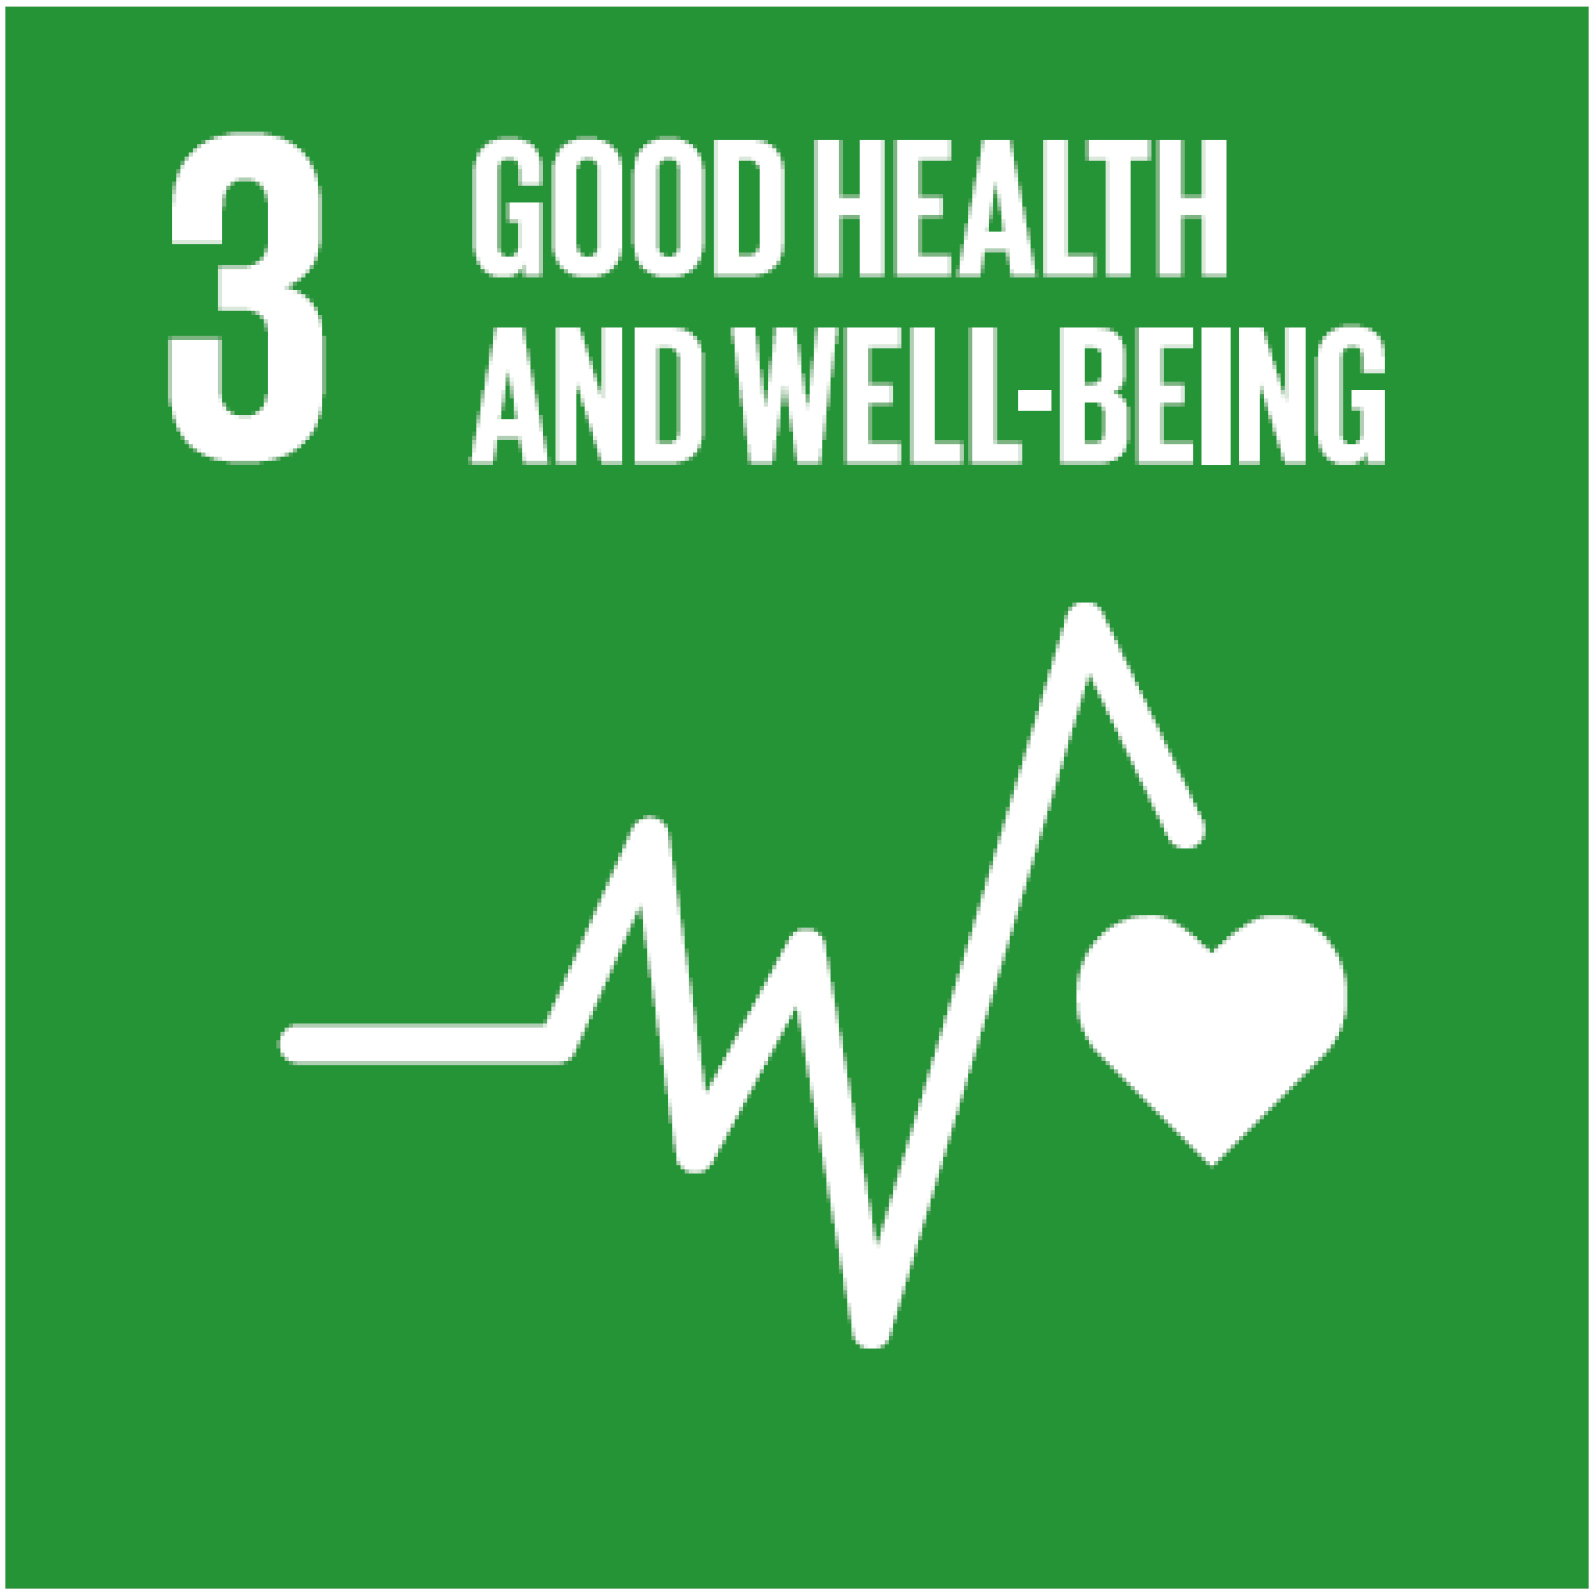 JS Proputec works with UN SDG no. 3 - Good Health and Well-being